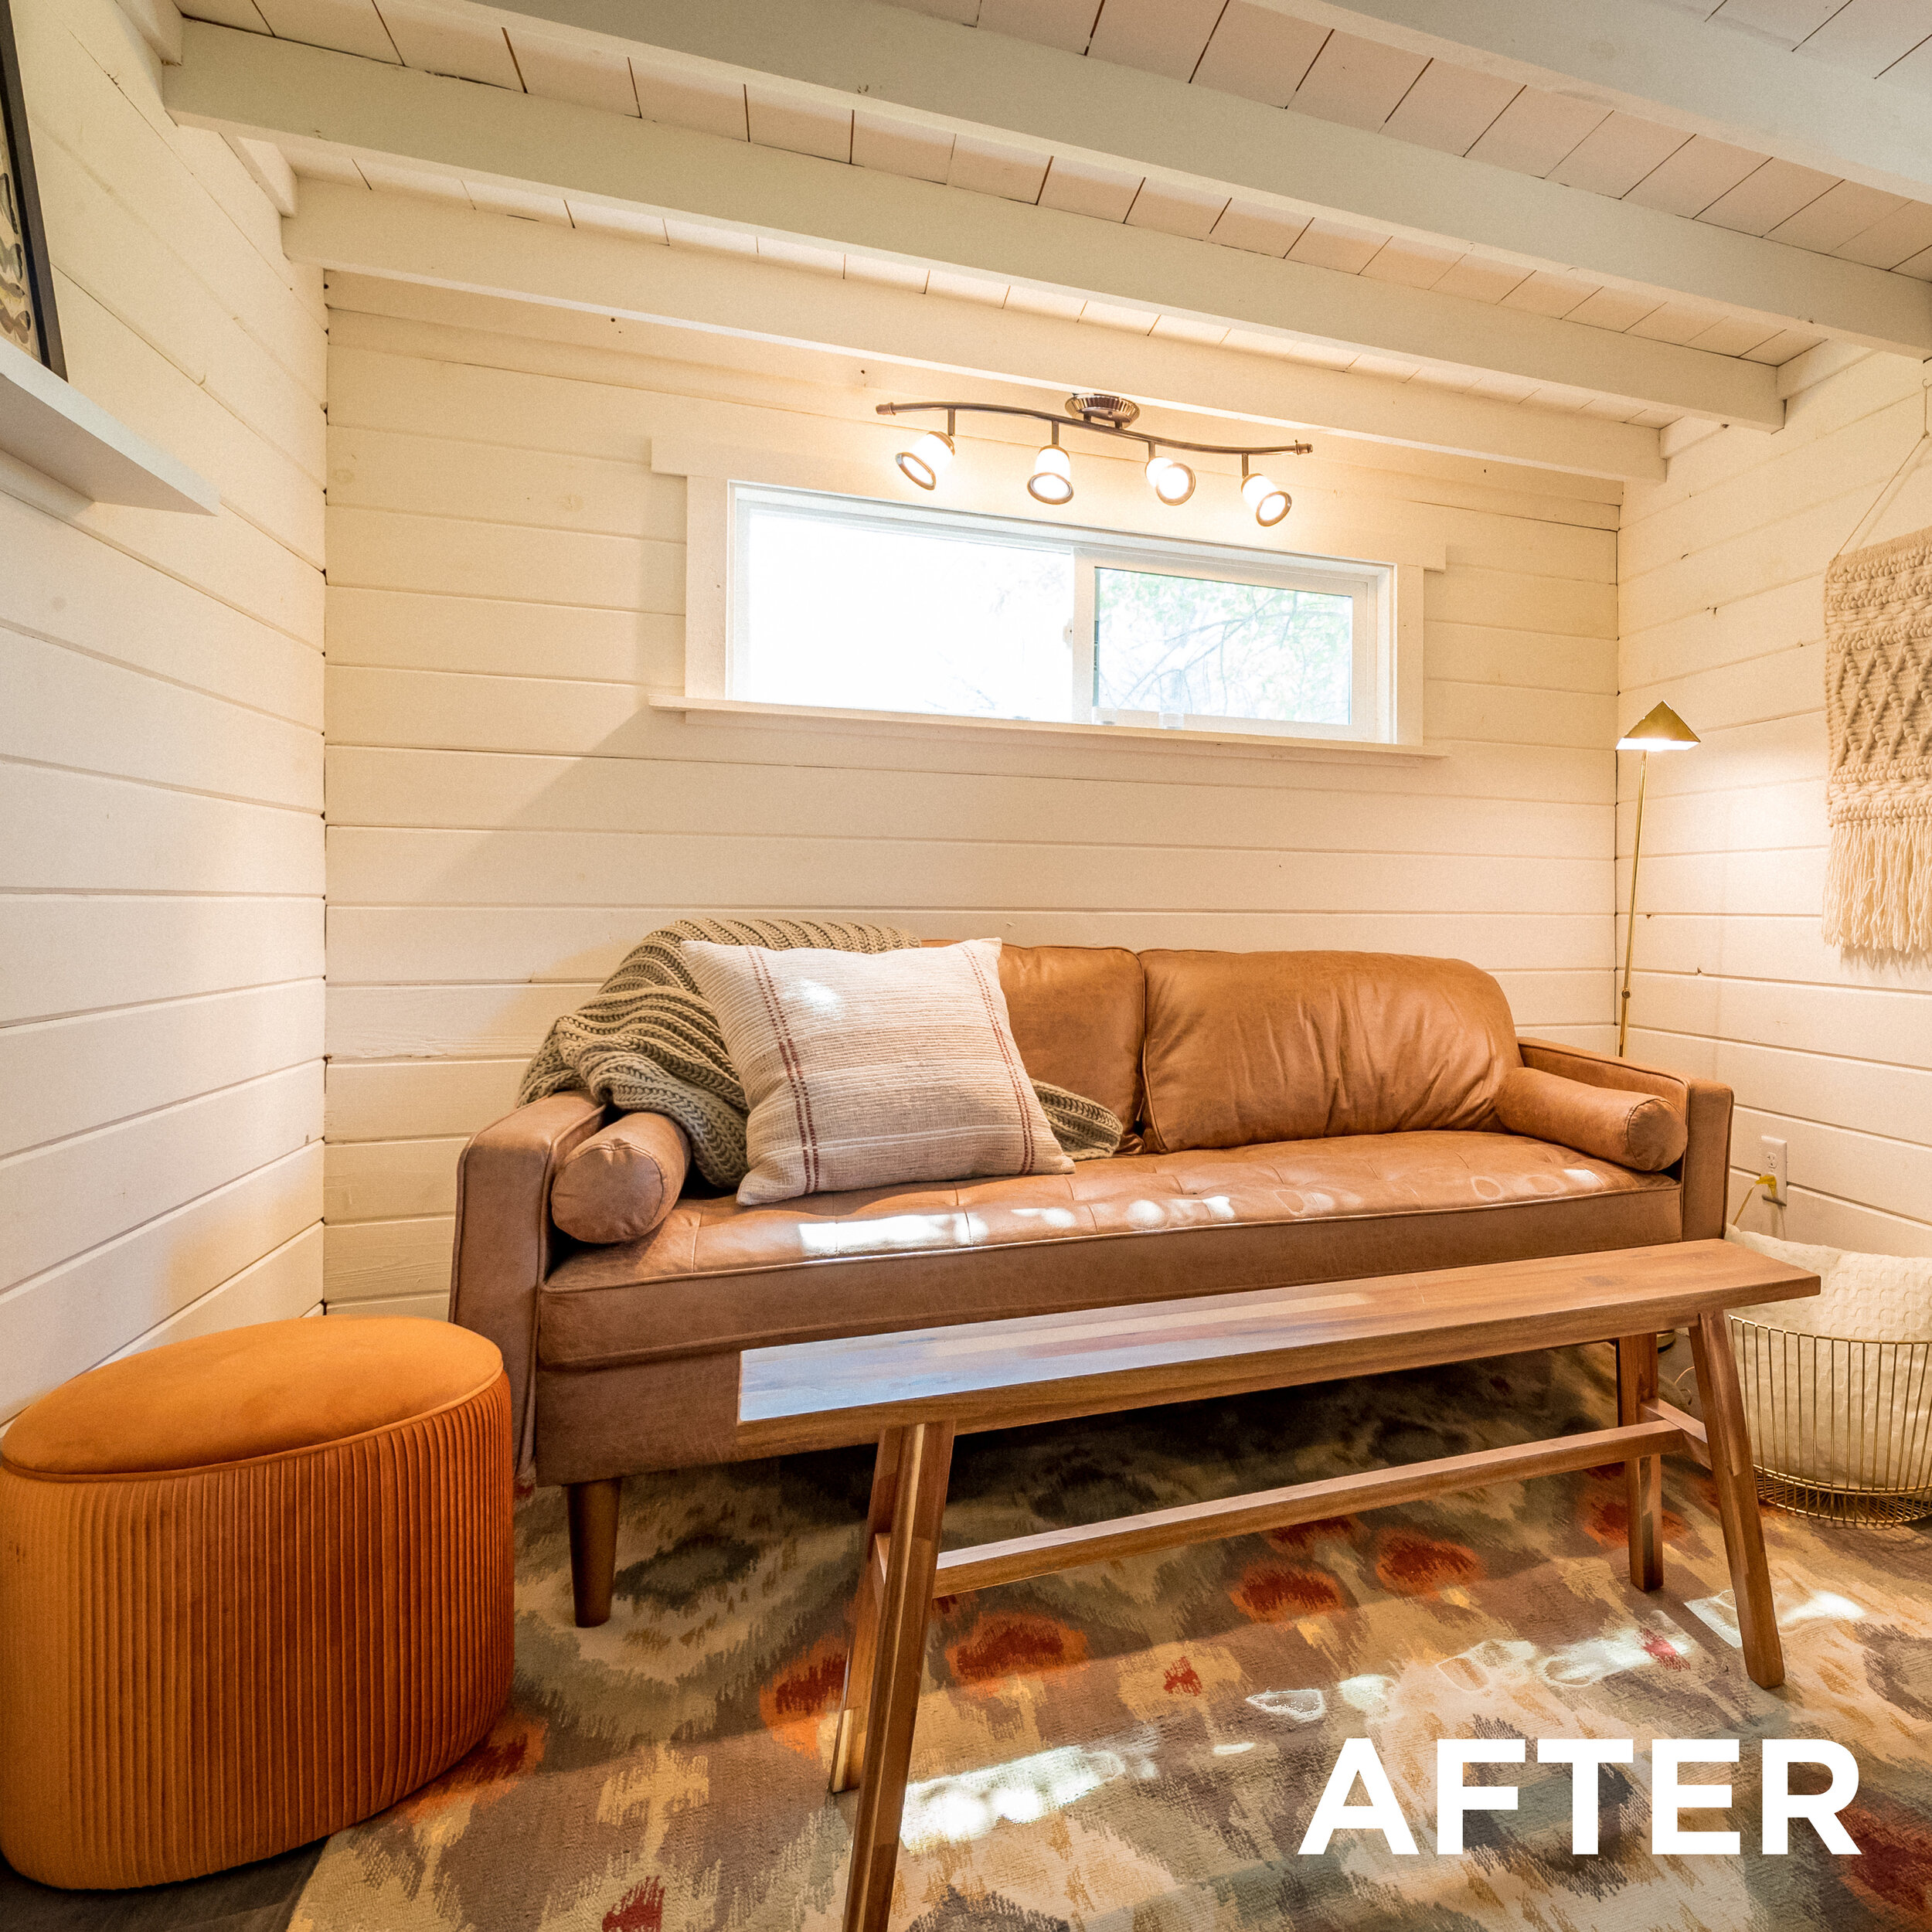 BEFORE & AFTER MARY TINY HOUSE2.jpg